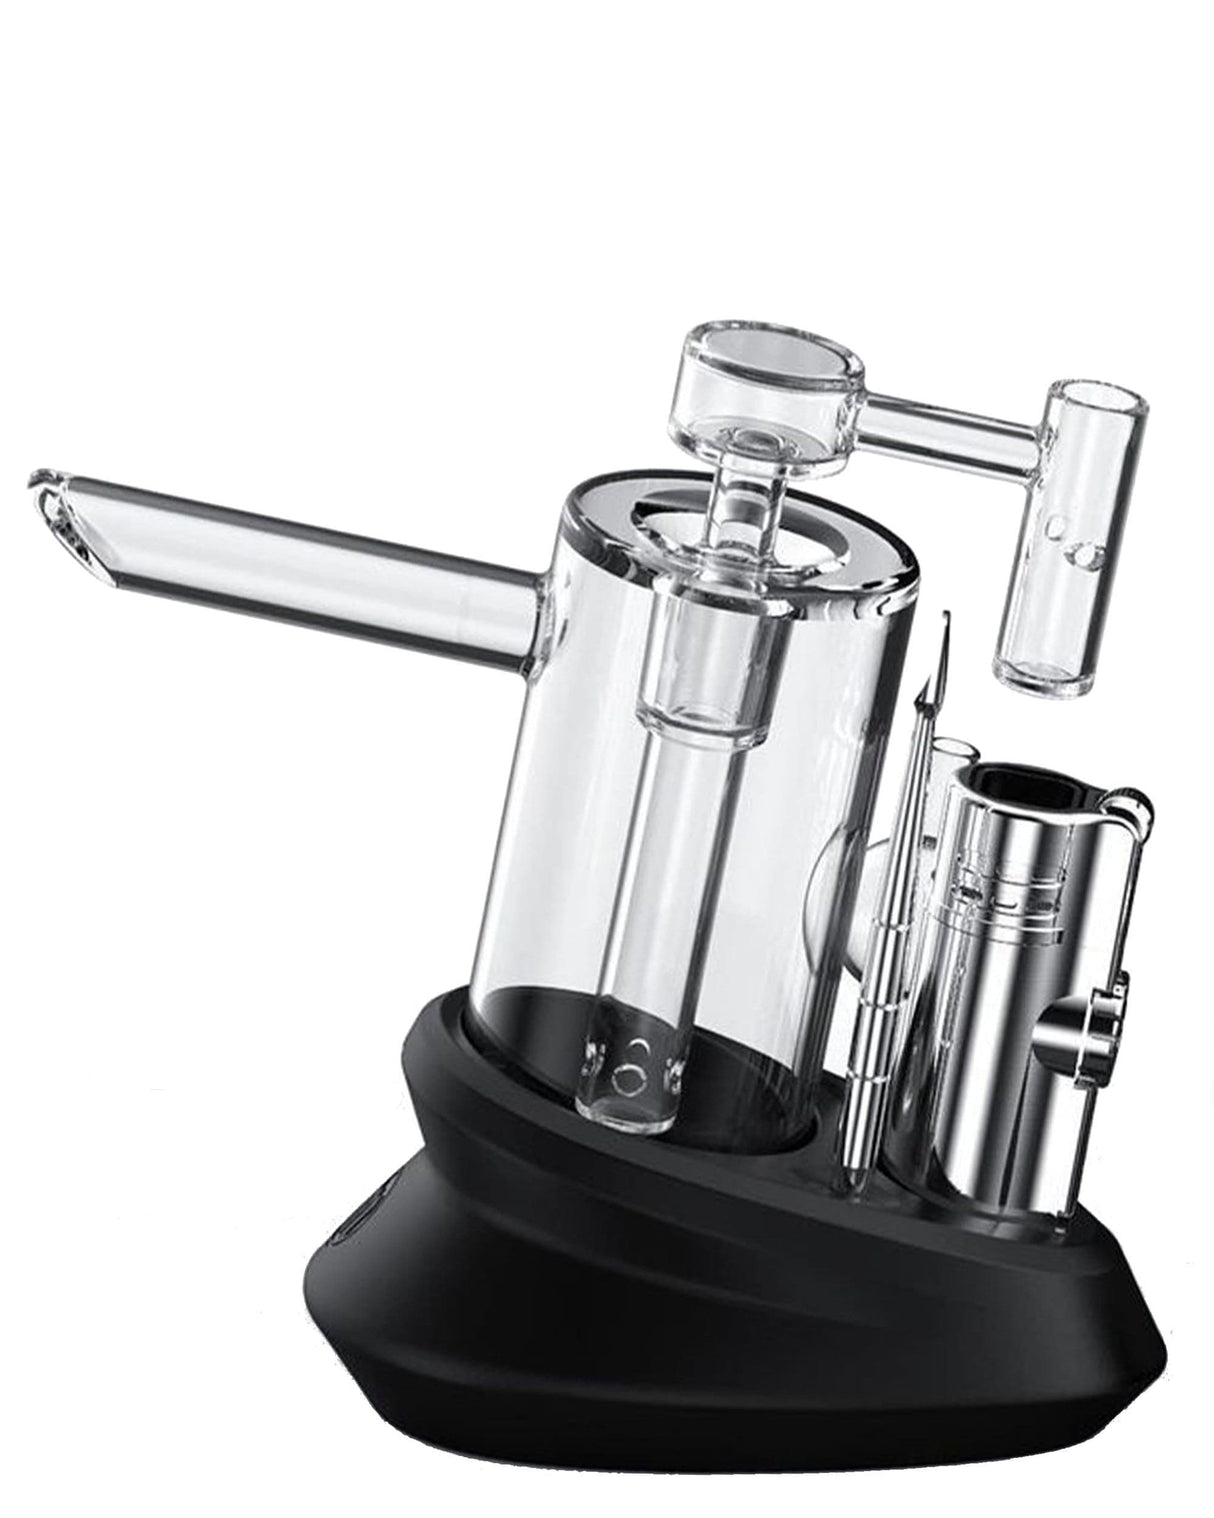 Myster HAMR Black Silicone & Borosilicate Glass All-In-One Dab Rig for Concentrates